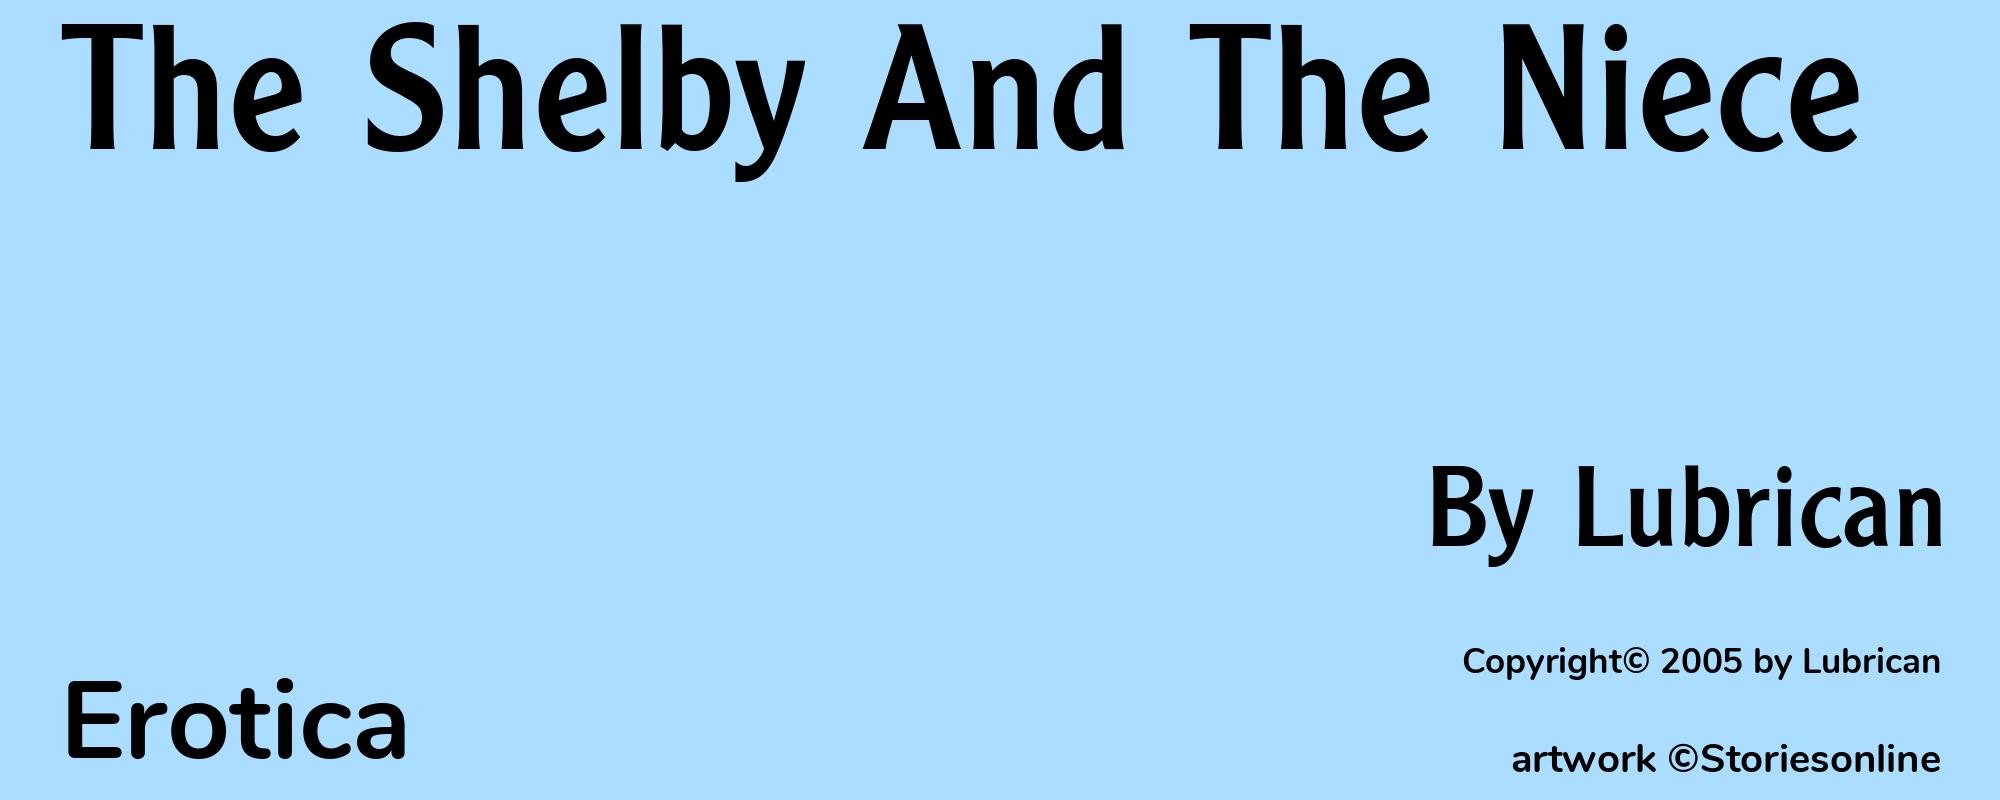 The Shelby And The Niece - Cover